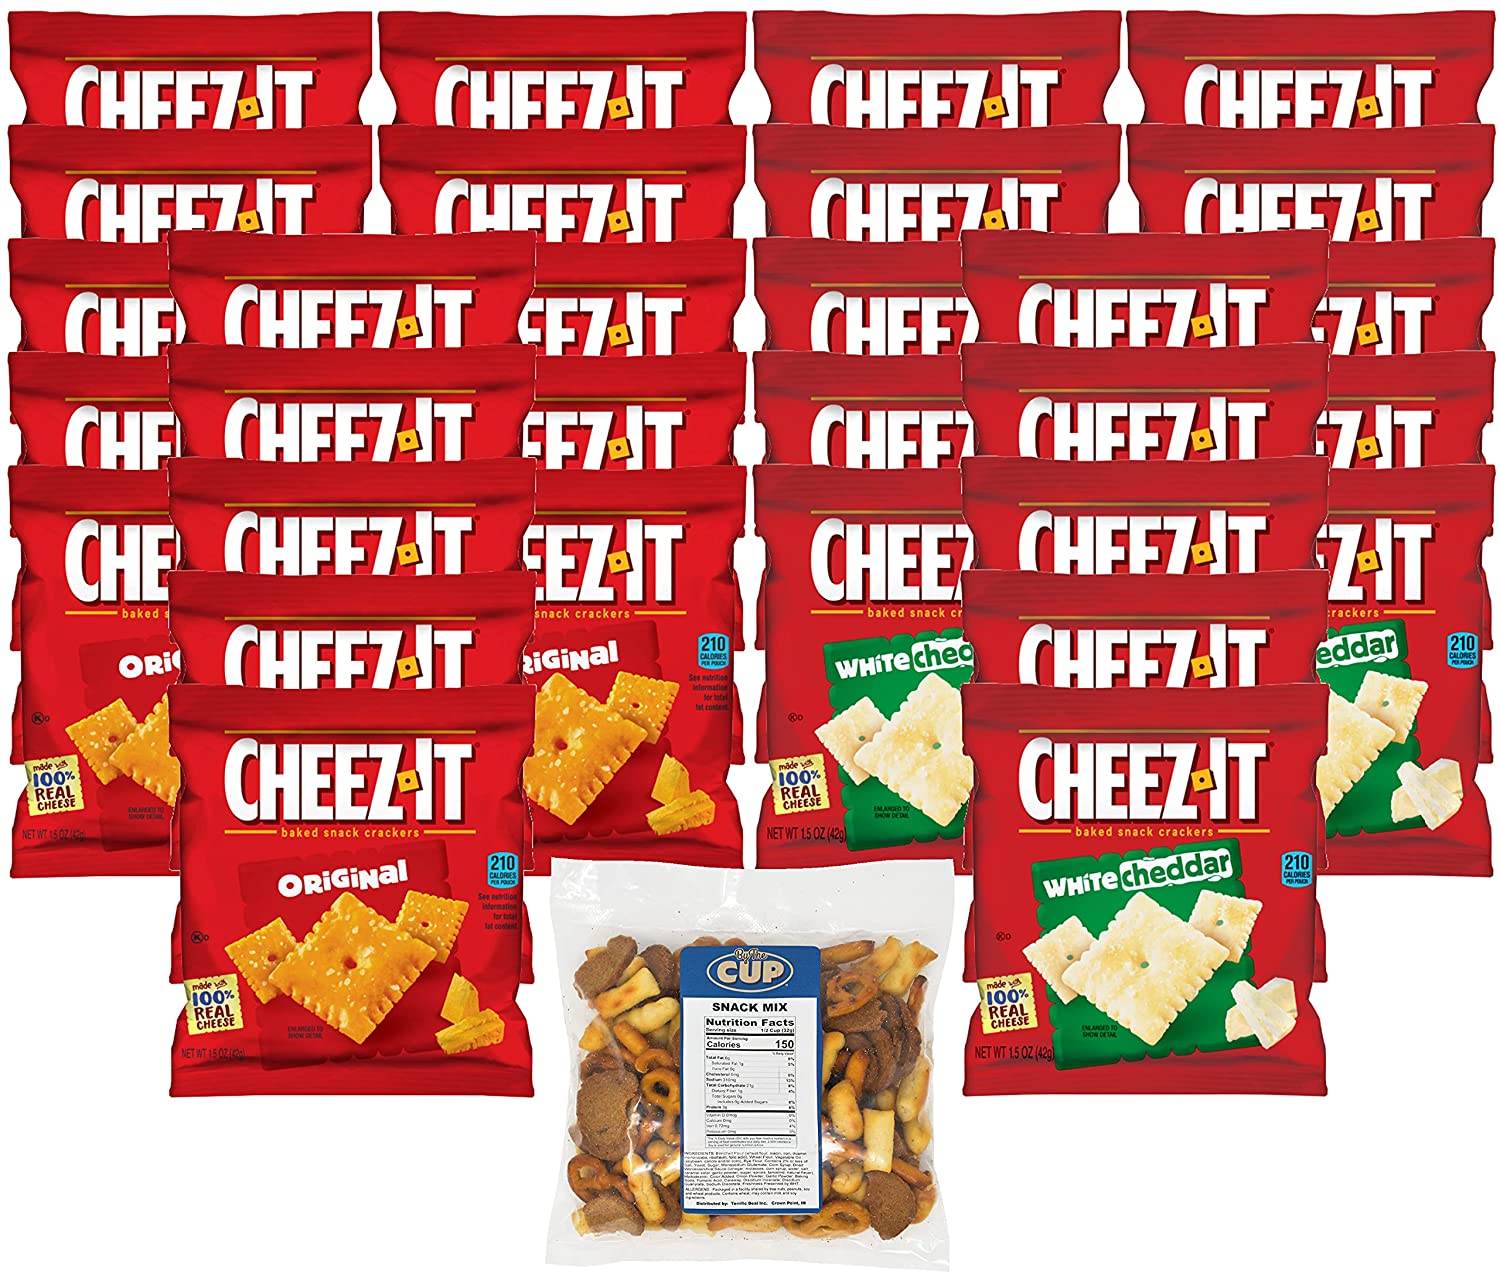 Kellogg's Cheez-It Cracker Bundle, Original and White Cheddar, 1.5 oz Bags, 15 of each (Pack of 30) with By The Cup Snack Mix